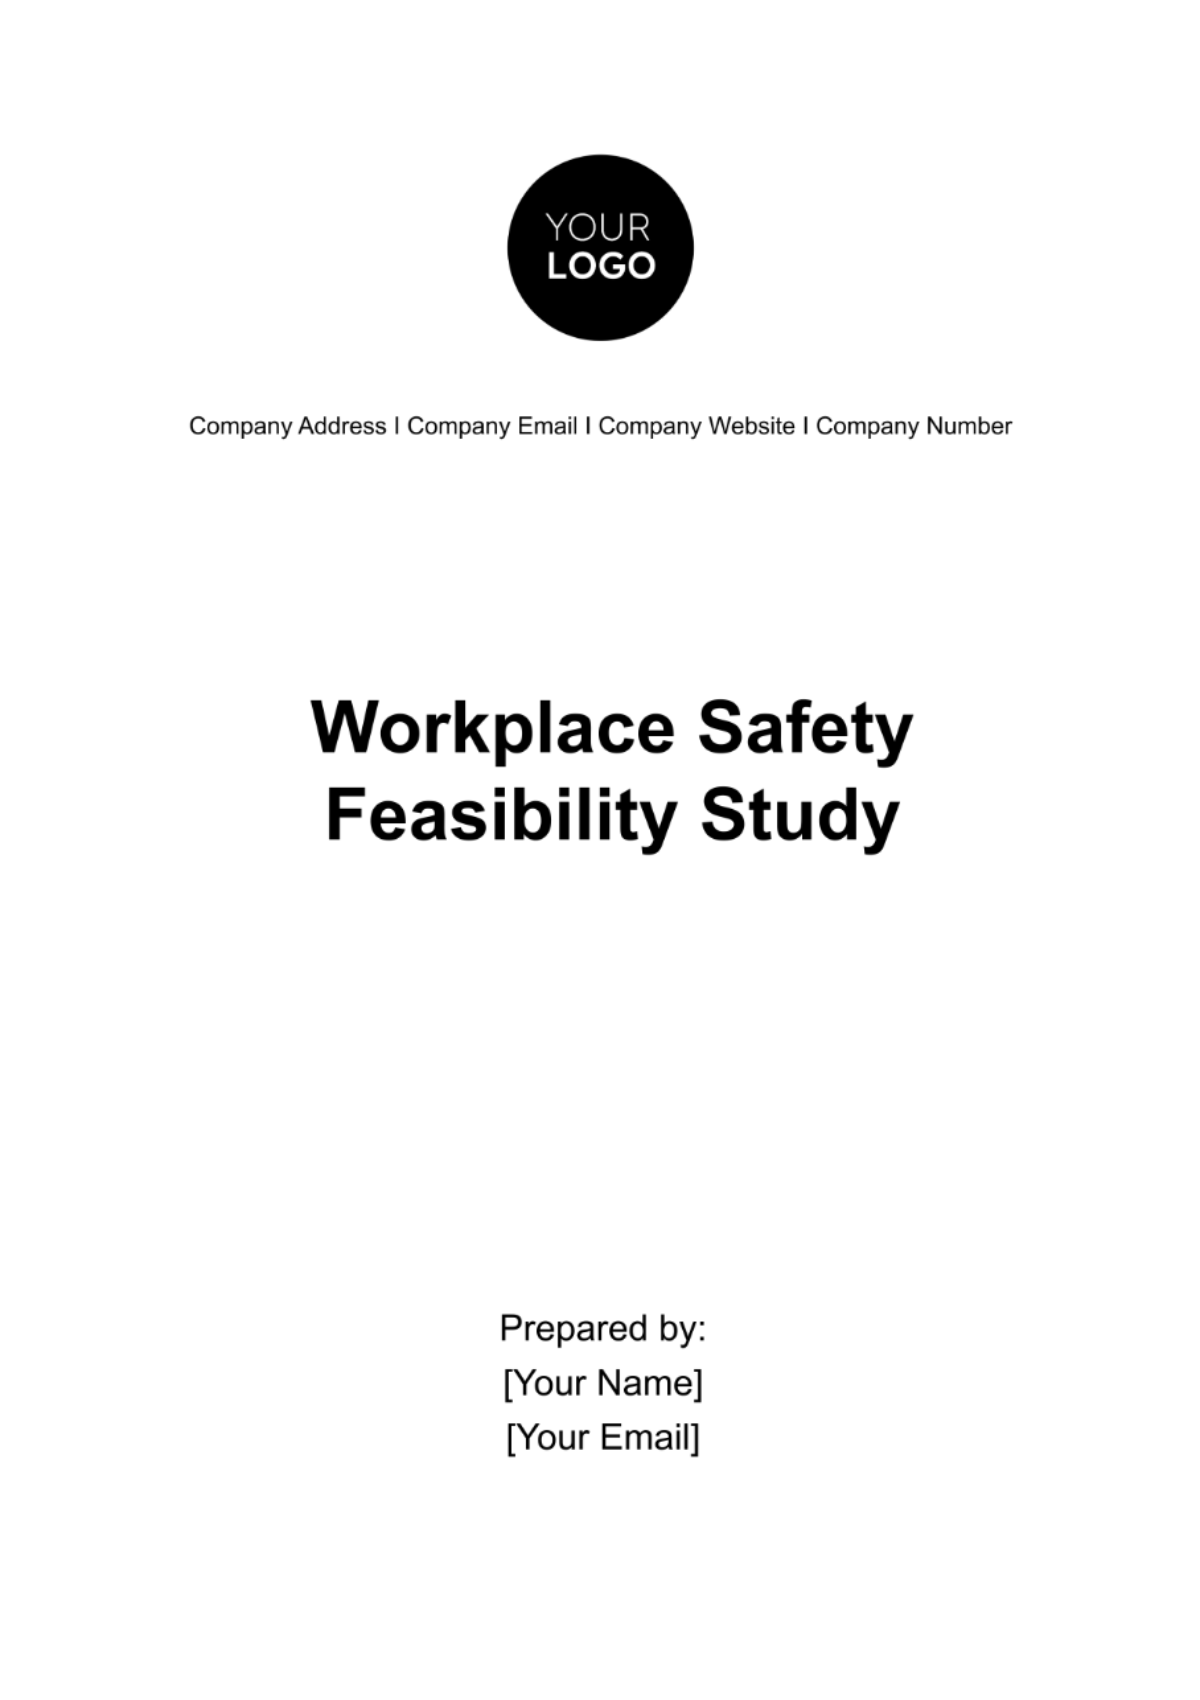 Workplace Safety Feasibility Study Template